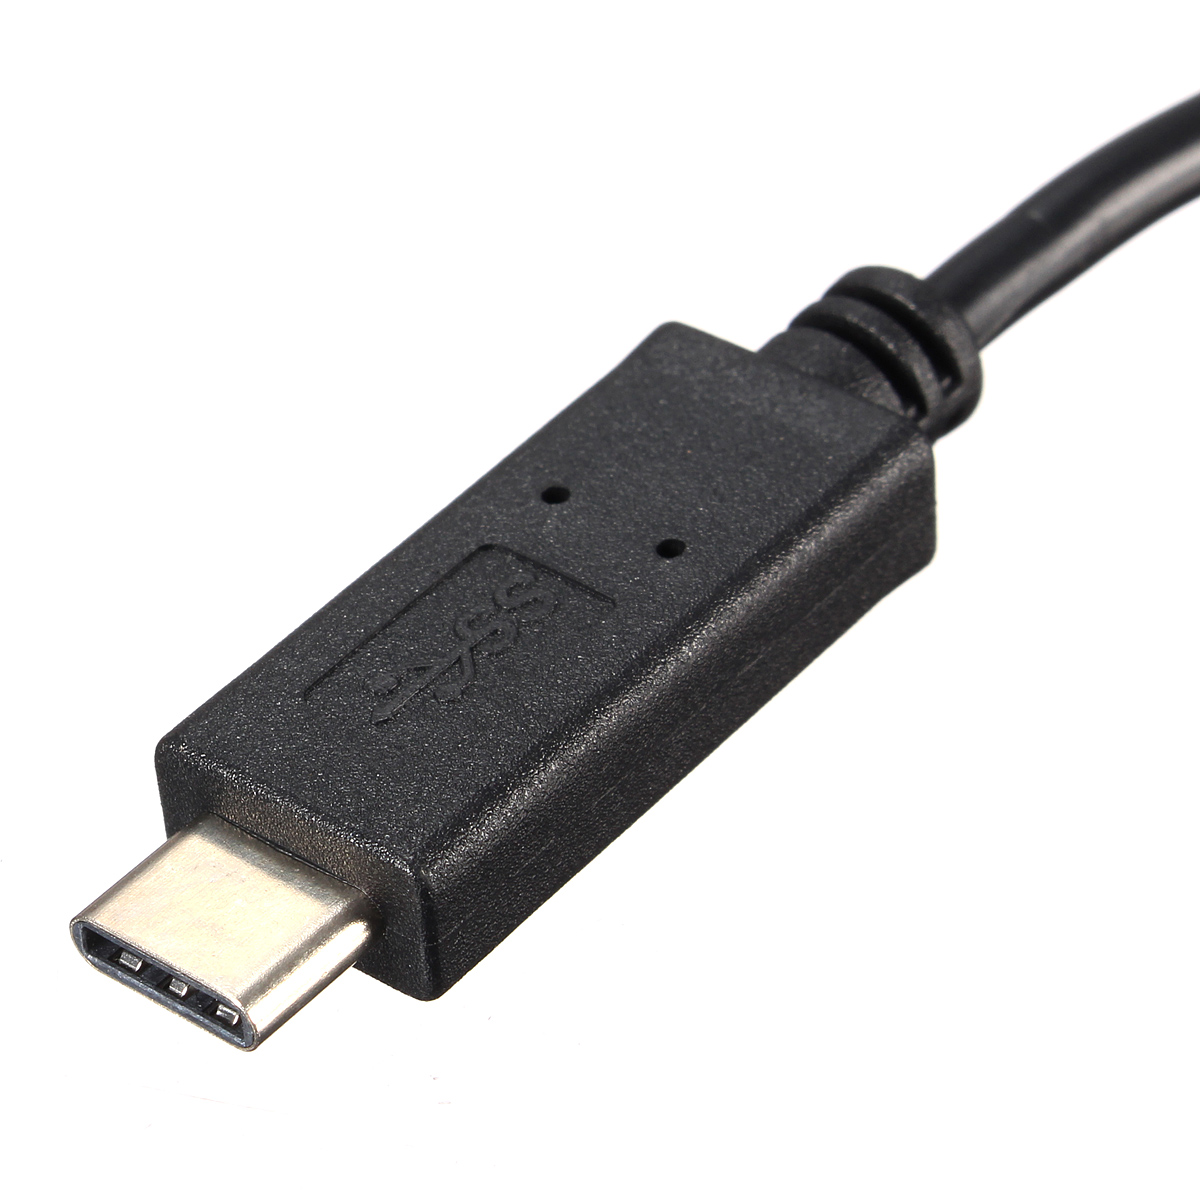 Dual usb type c extension cable for new machine